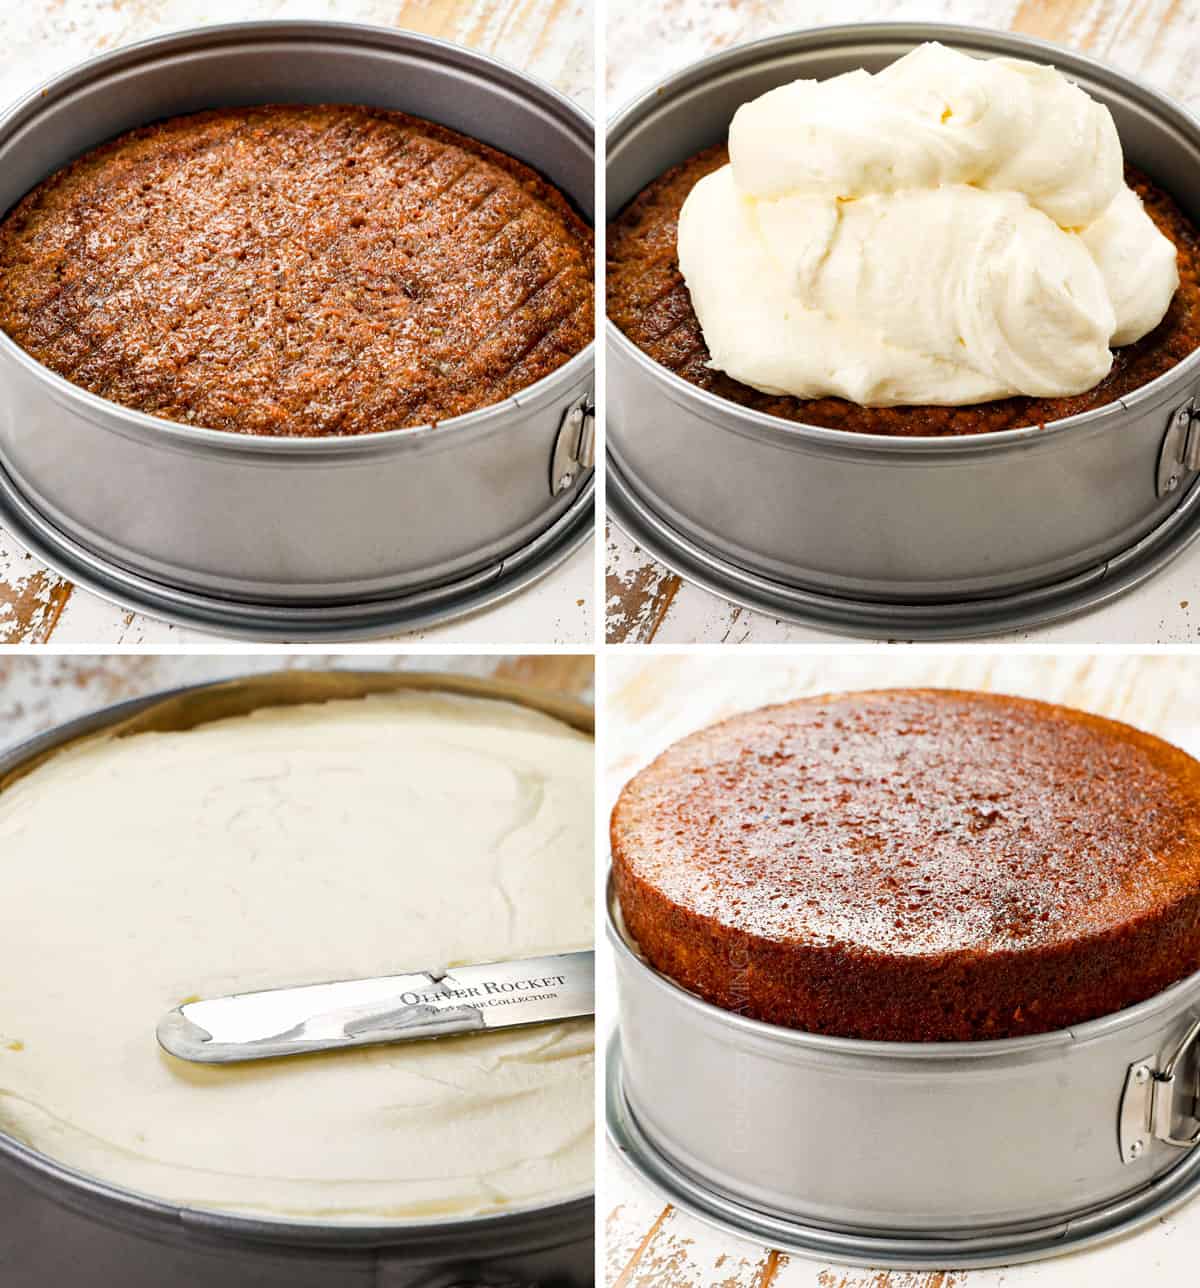 a collage showing how to make carrot cake cheesecake by placing one carrot cake round in a springform pan, topping with cheesecake, then topping with a second carrot cake round